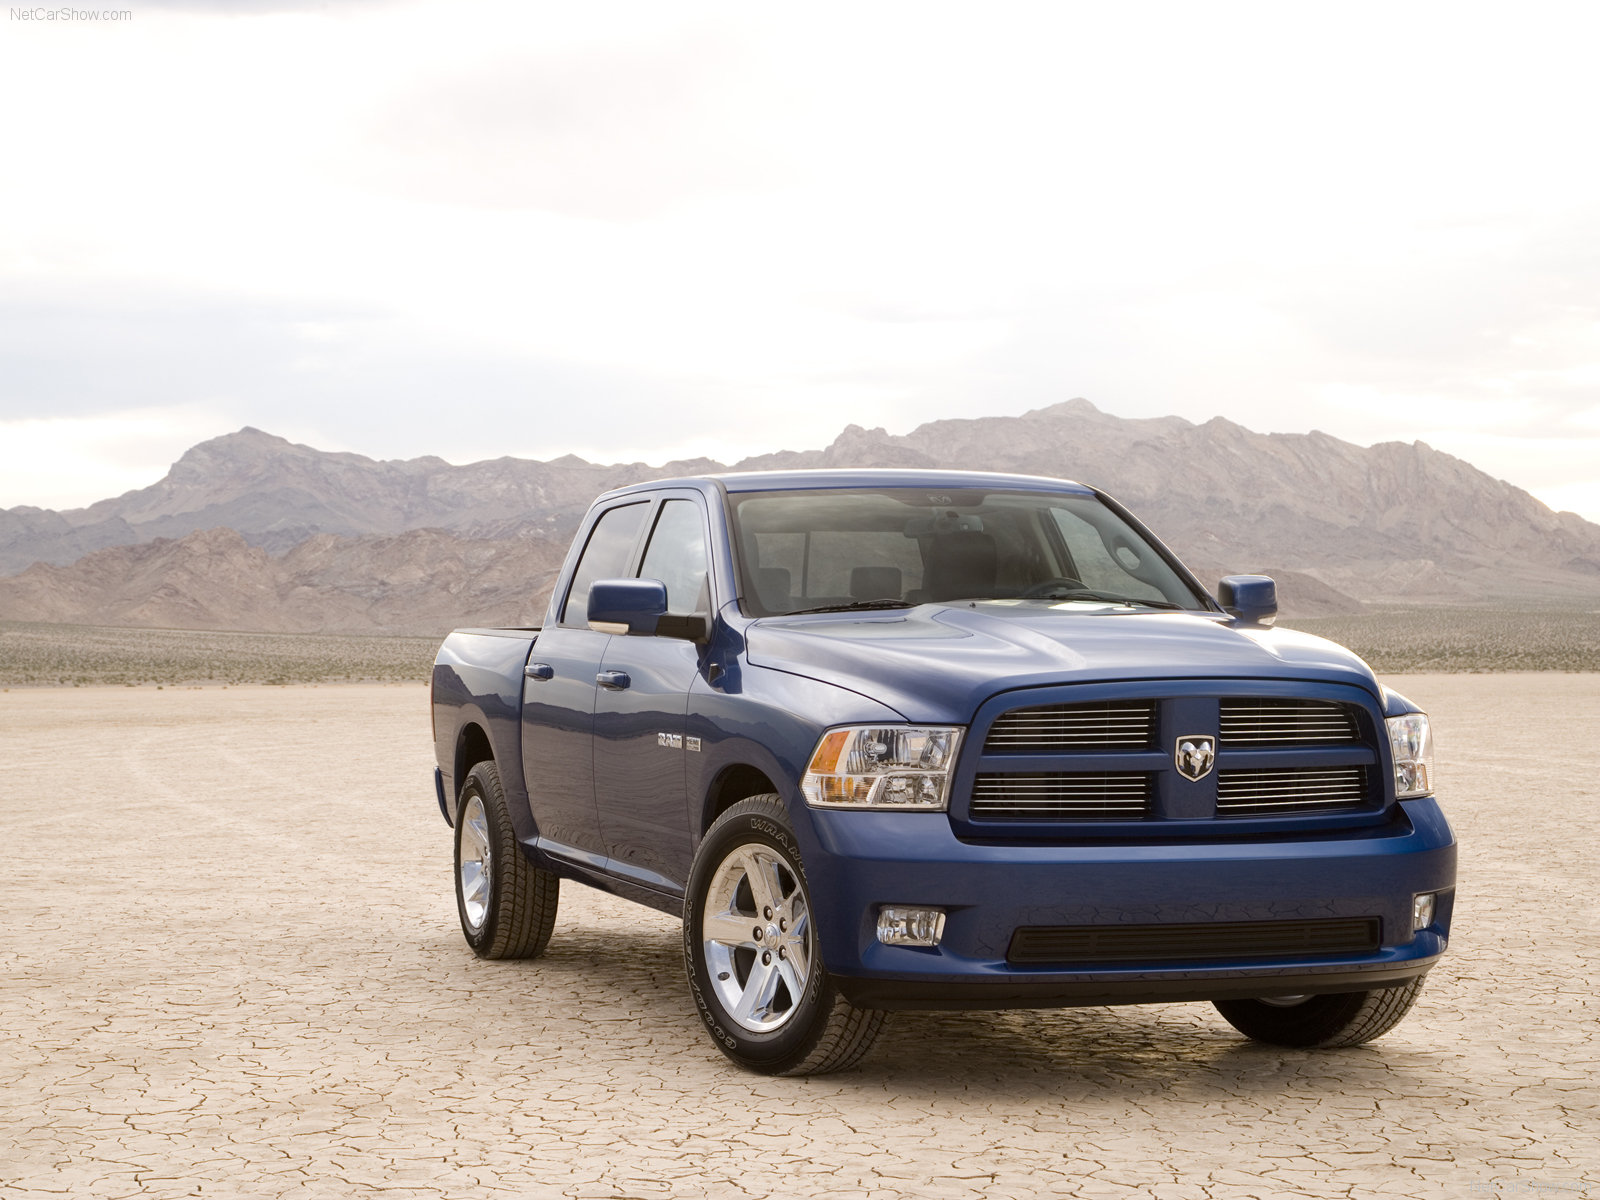 You can vote for this Dodge Ram 1500 Sport photo